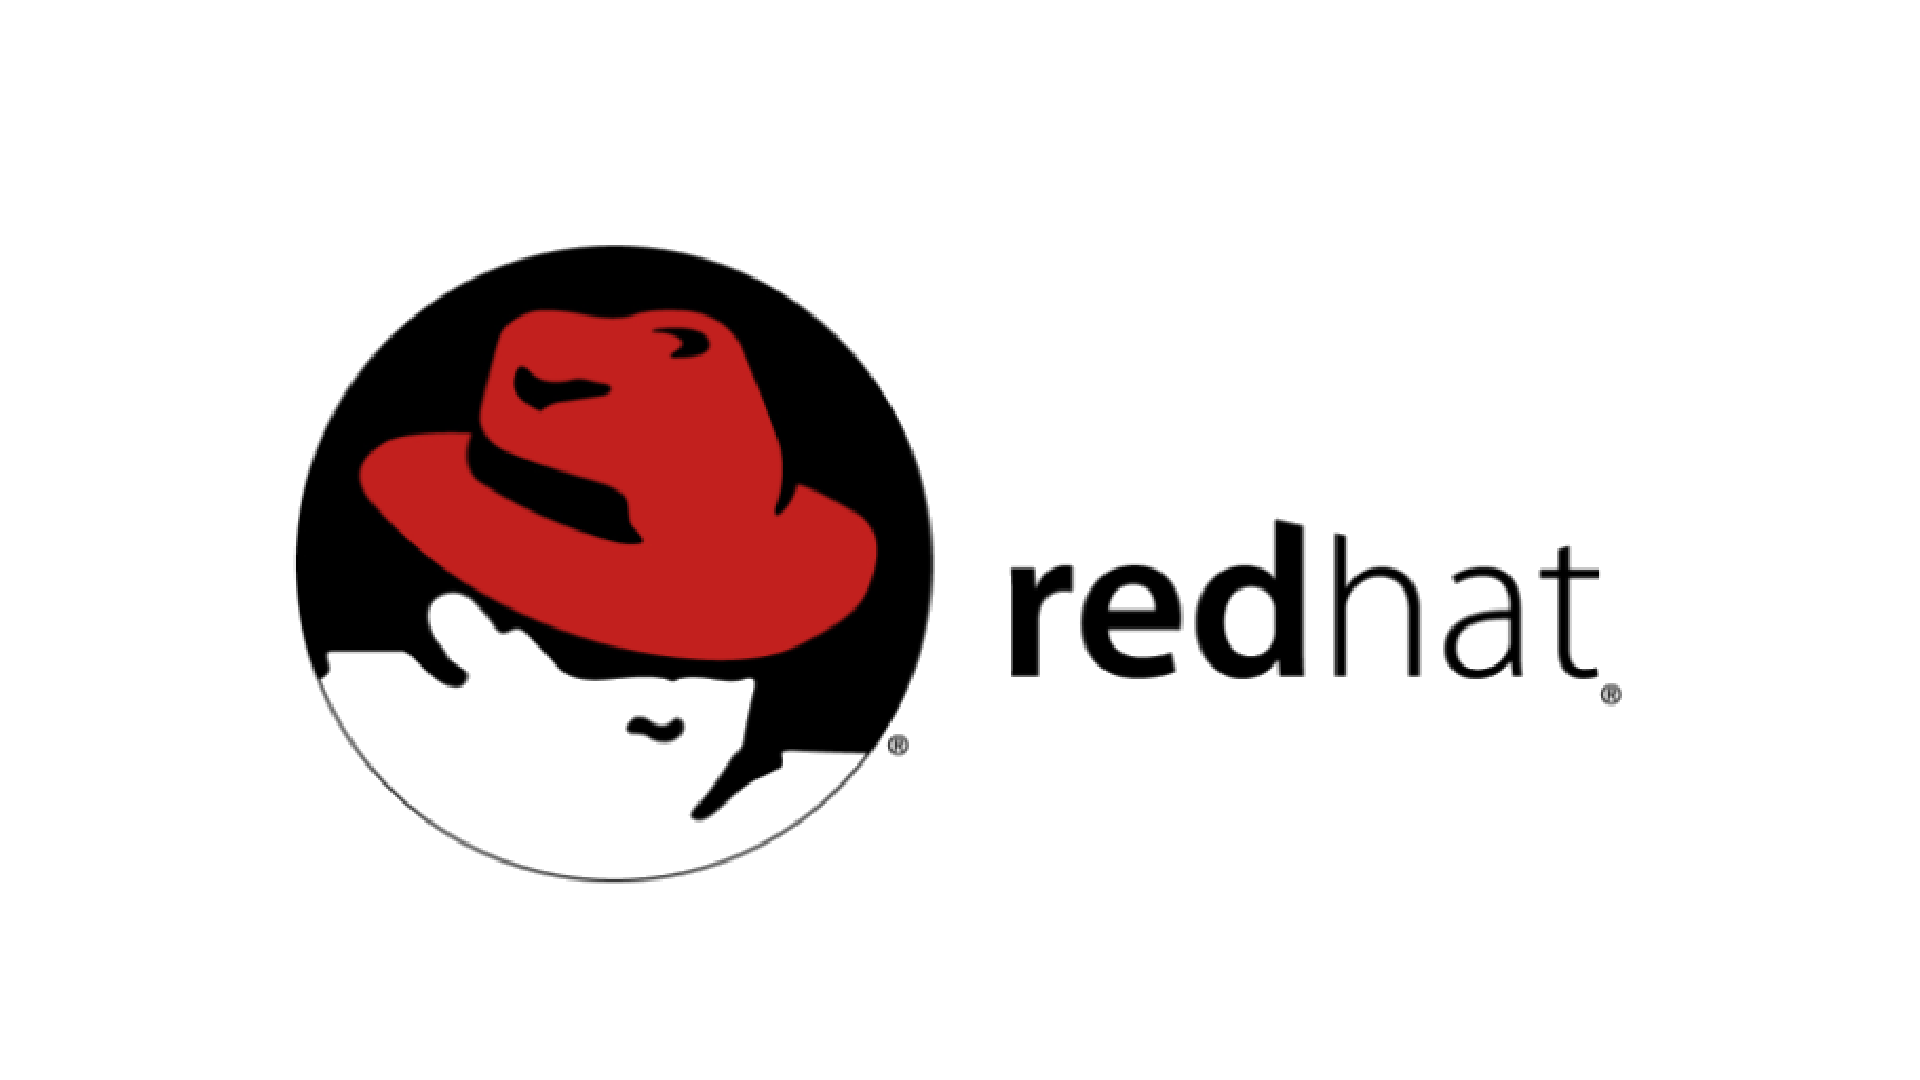 Red hat 7. Red hat Enterprise Linux. Red hat Enterprise Linux (RHEL). Значок Red hat. Red hat Enterprise логотип.